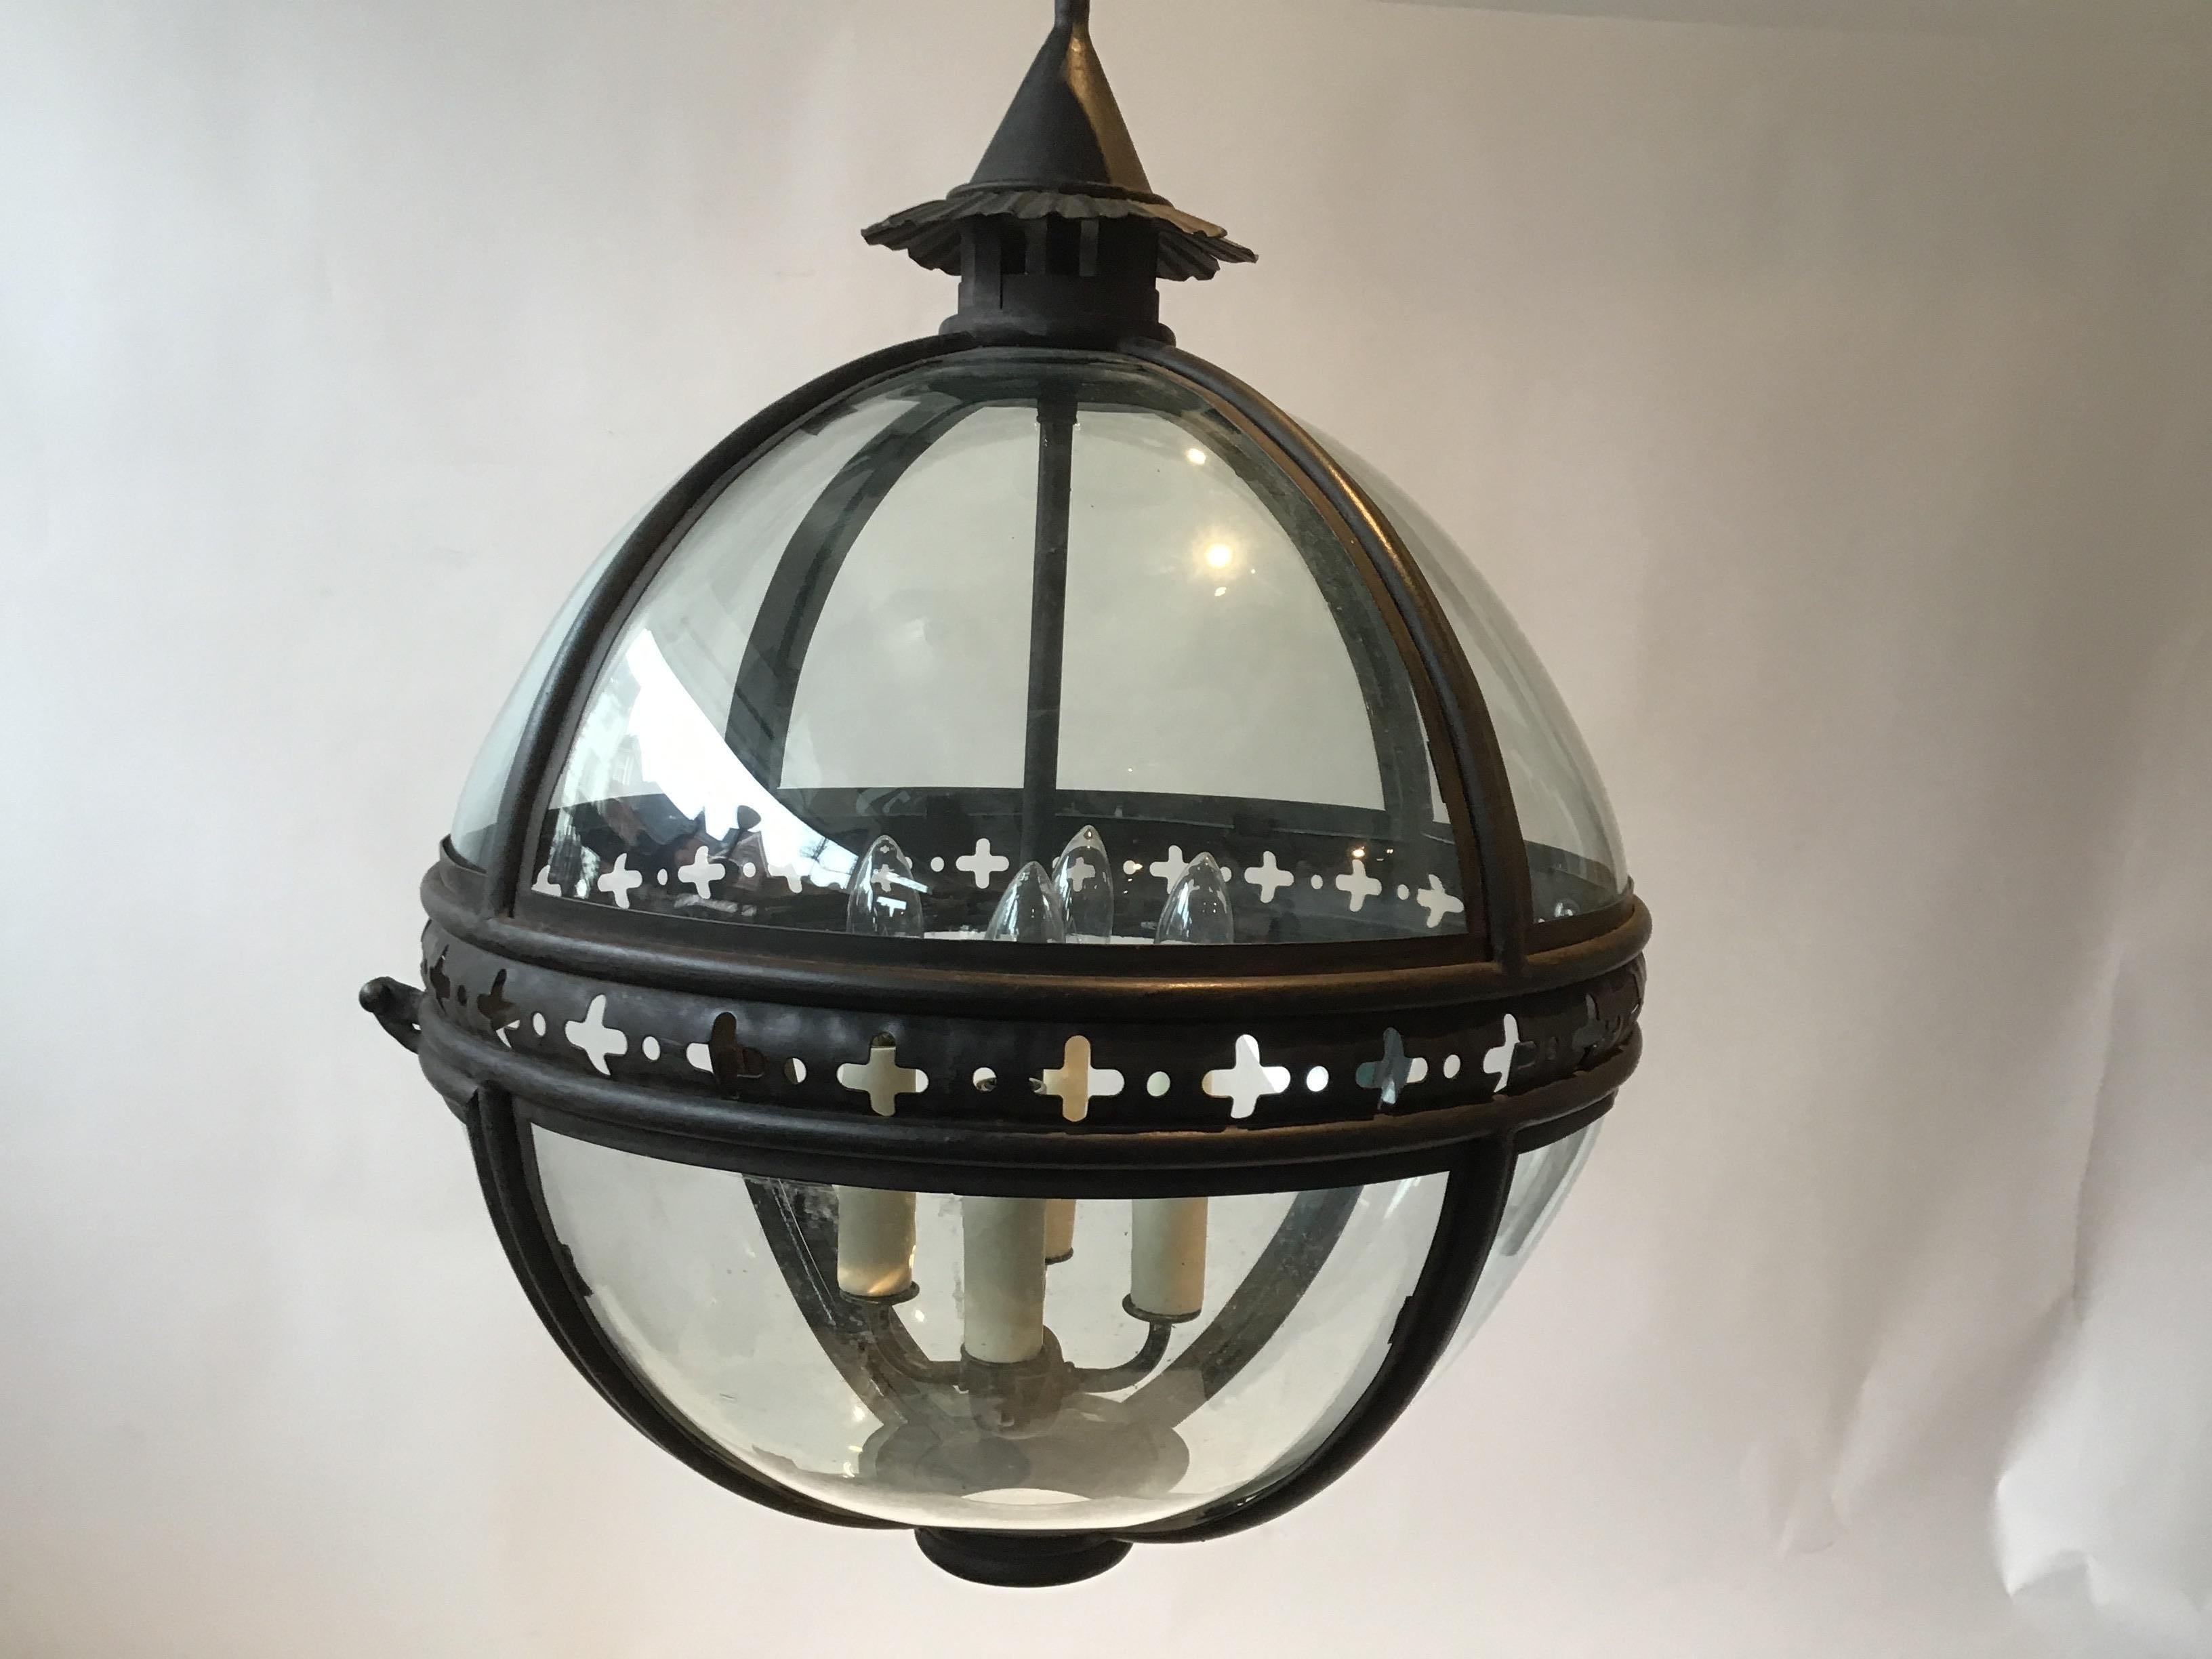 Pair of Paul Ferrante iron and glass orb chandeliers.